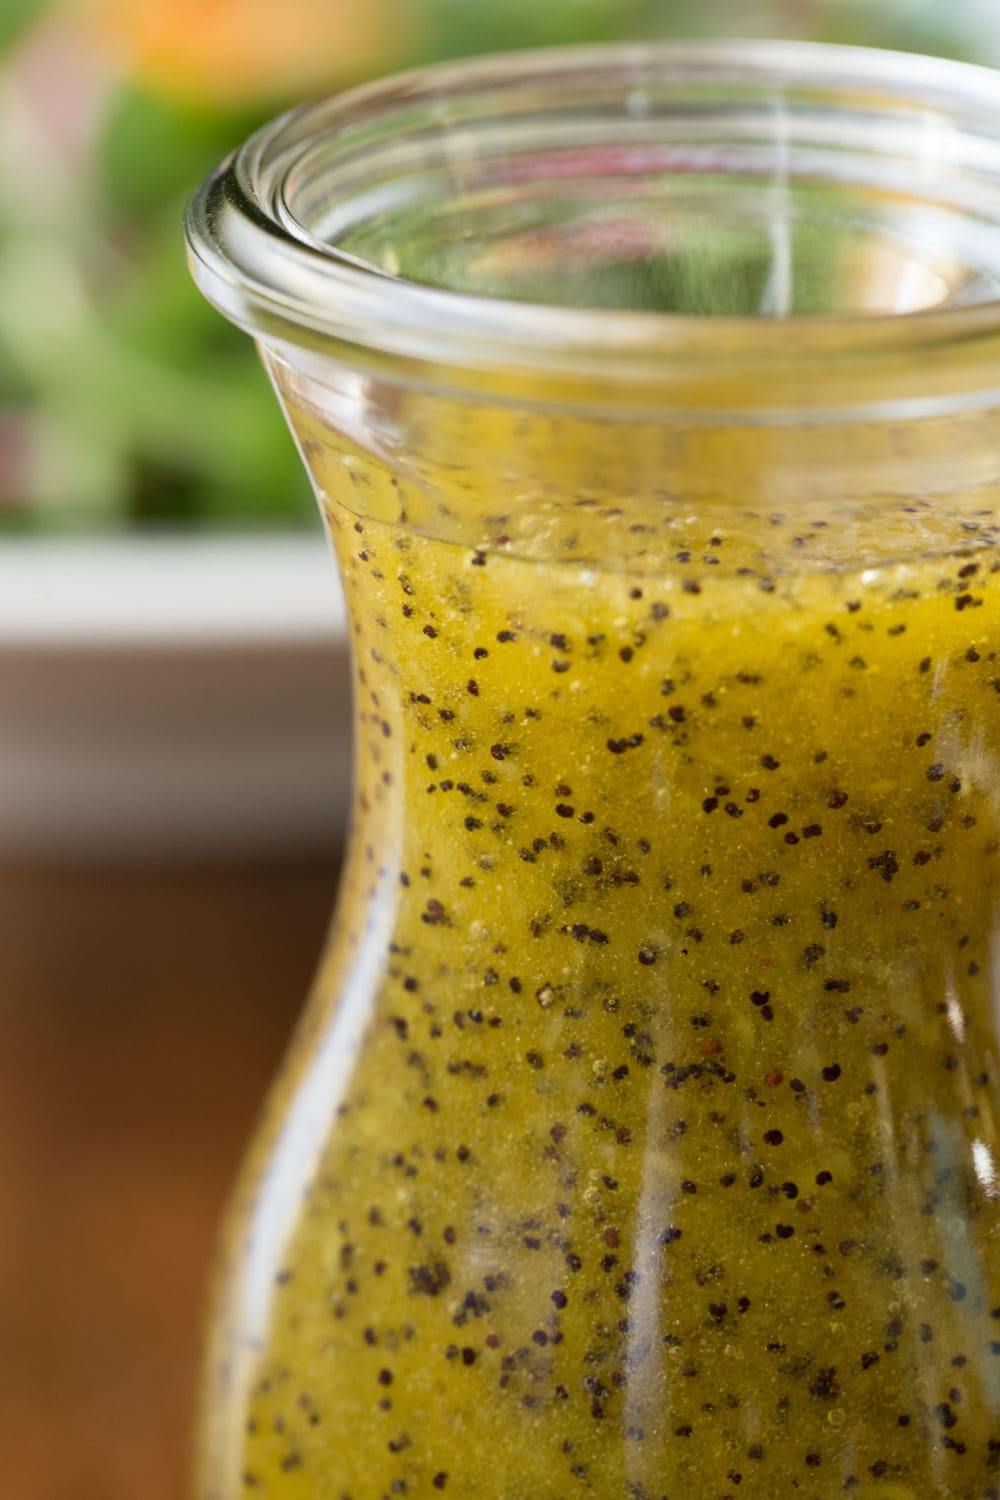 Lemon Ginger Salad Dressing - this super easy dressing transform boring greens to bright fresh and delicious salads.